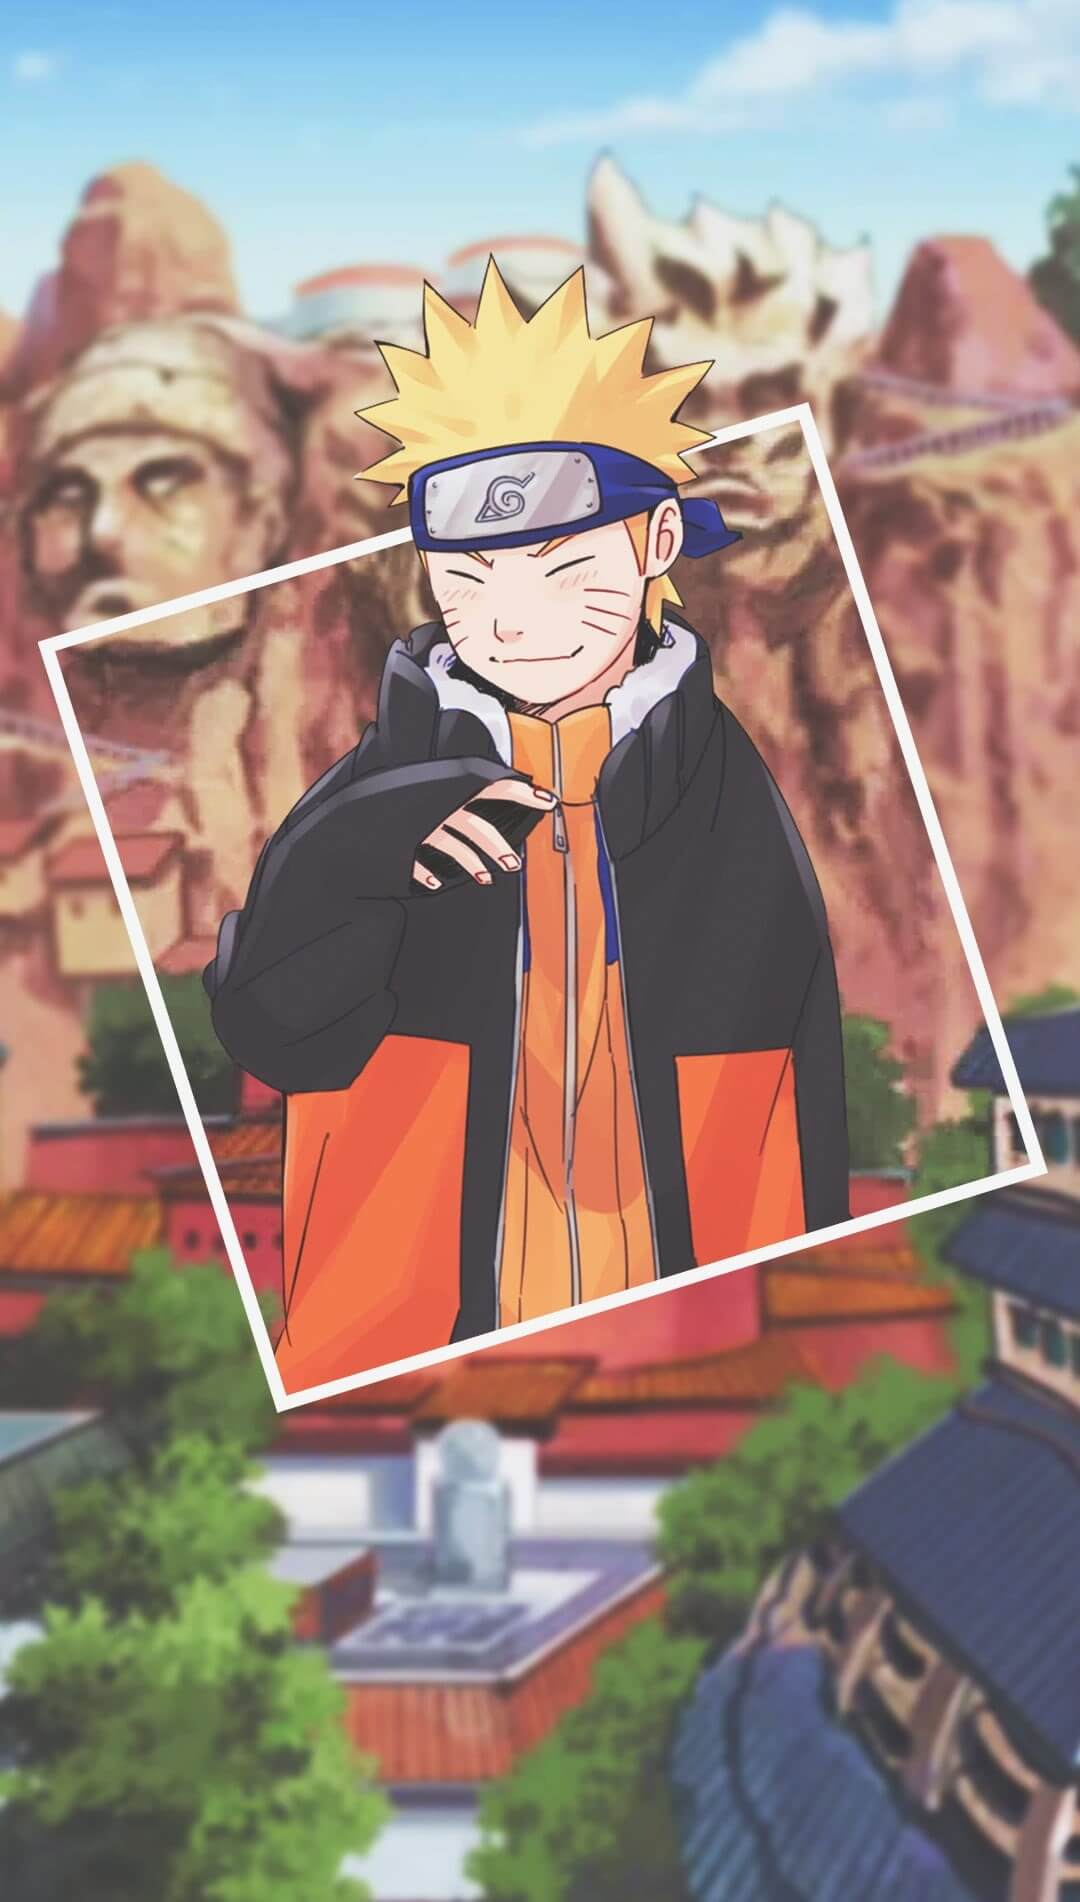 Hình nền anime boys anime picture in picture Naruto anime